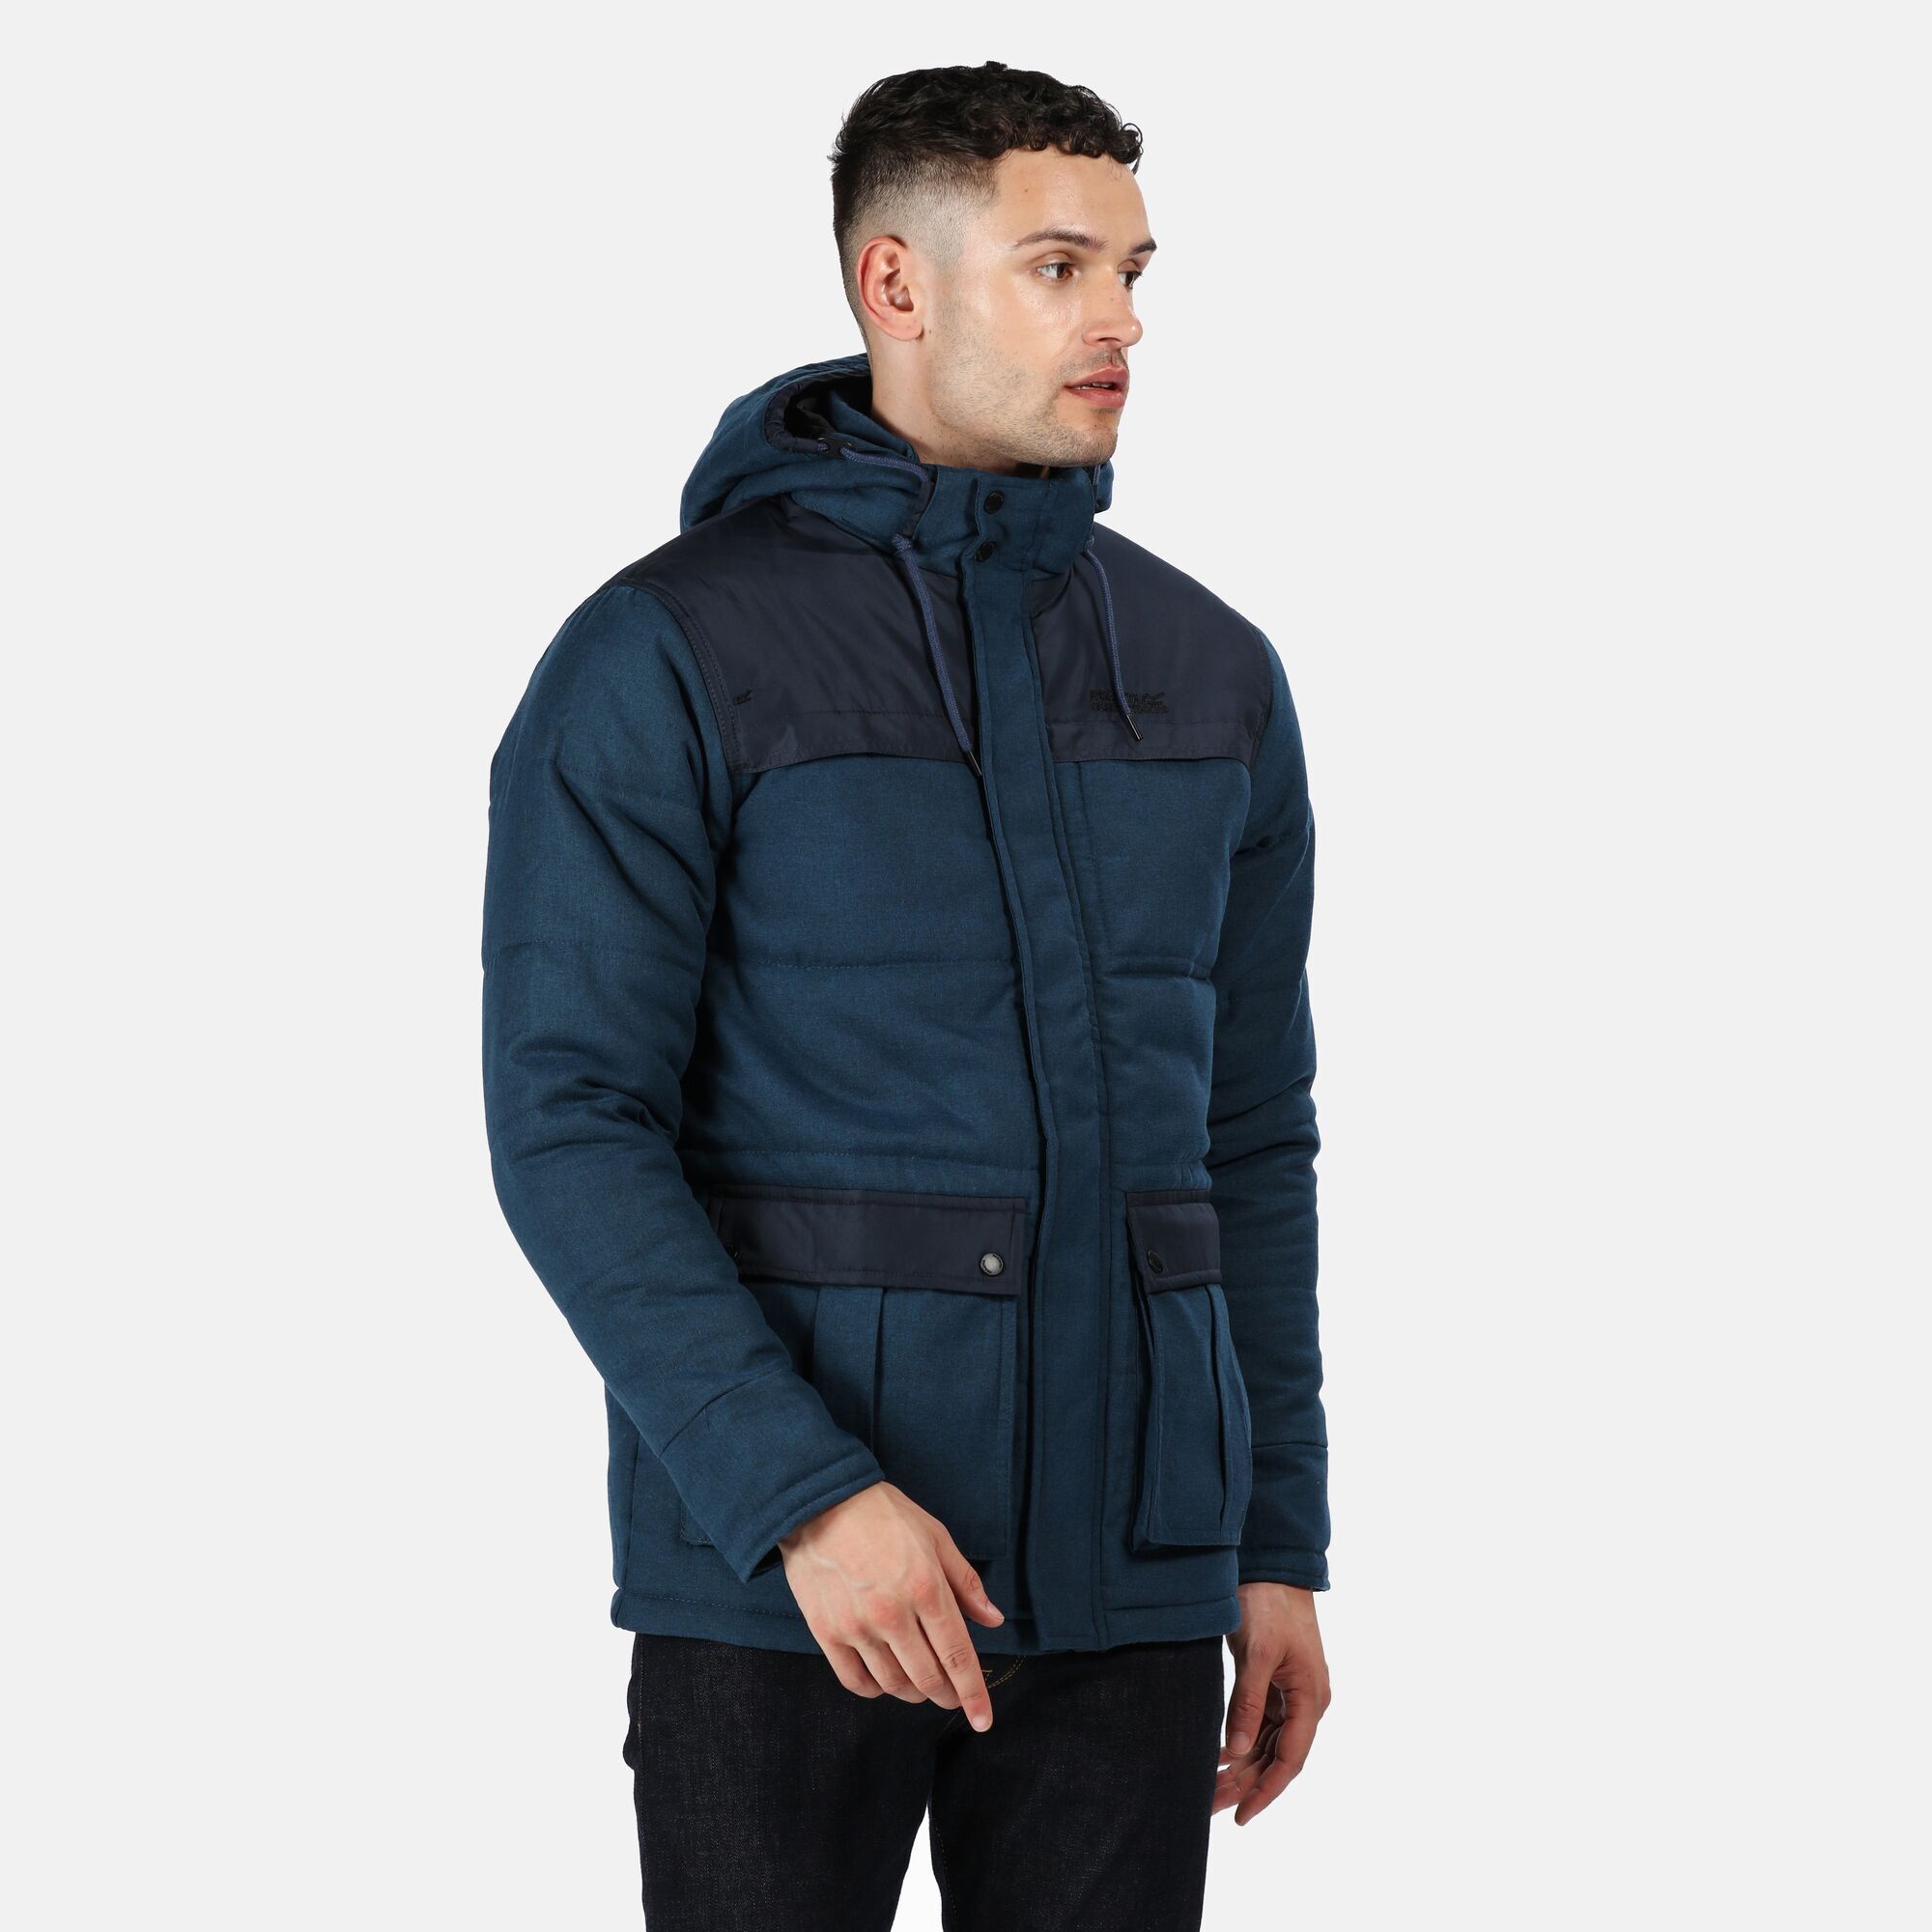 100% polyester micro poplin fabric. Water repellent coating. Thermo-guard insulation. Polyester taffeta lining. Internal security pocket, 1 chest pocket and 2 lower patch pockets with handwarmer pockets behind. Grown on hood with adjusters.